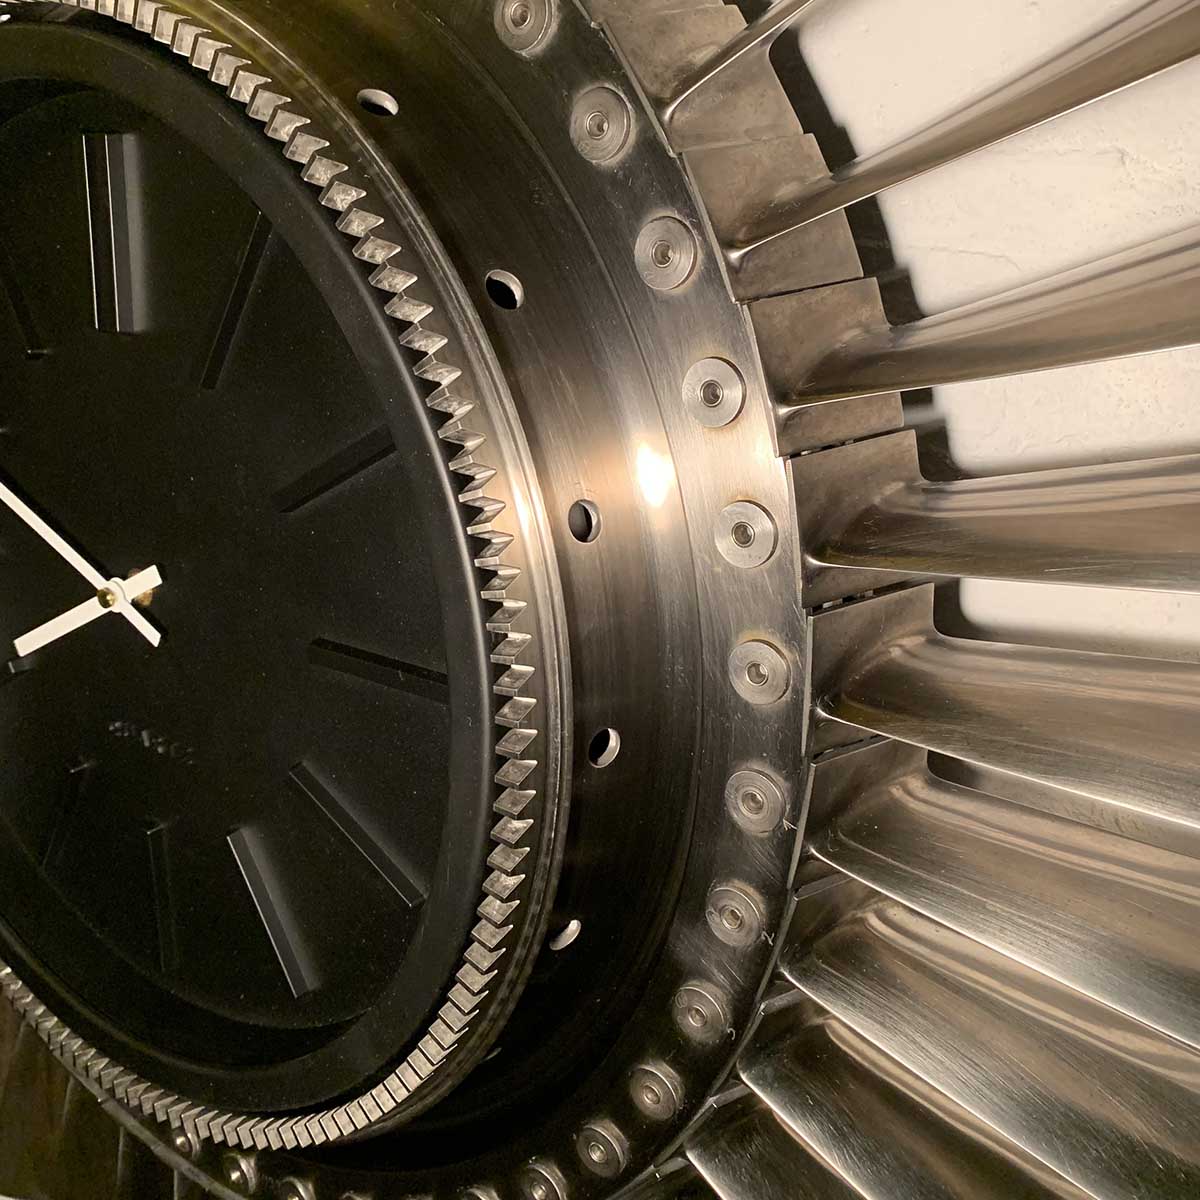 Photo of a part of the engine of a Sukhoi Su-22 aircraft that was turned into a clock.